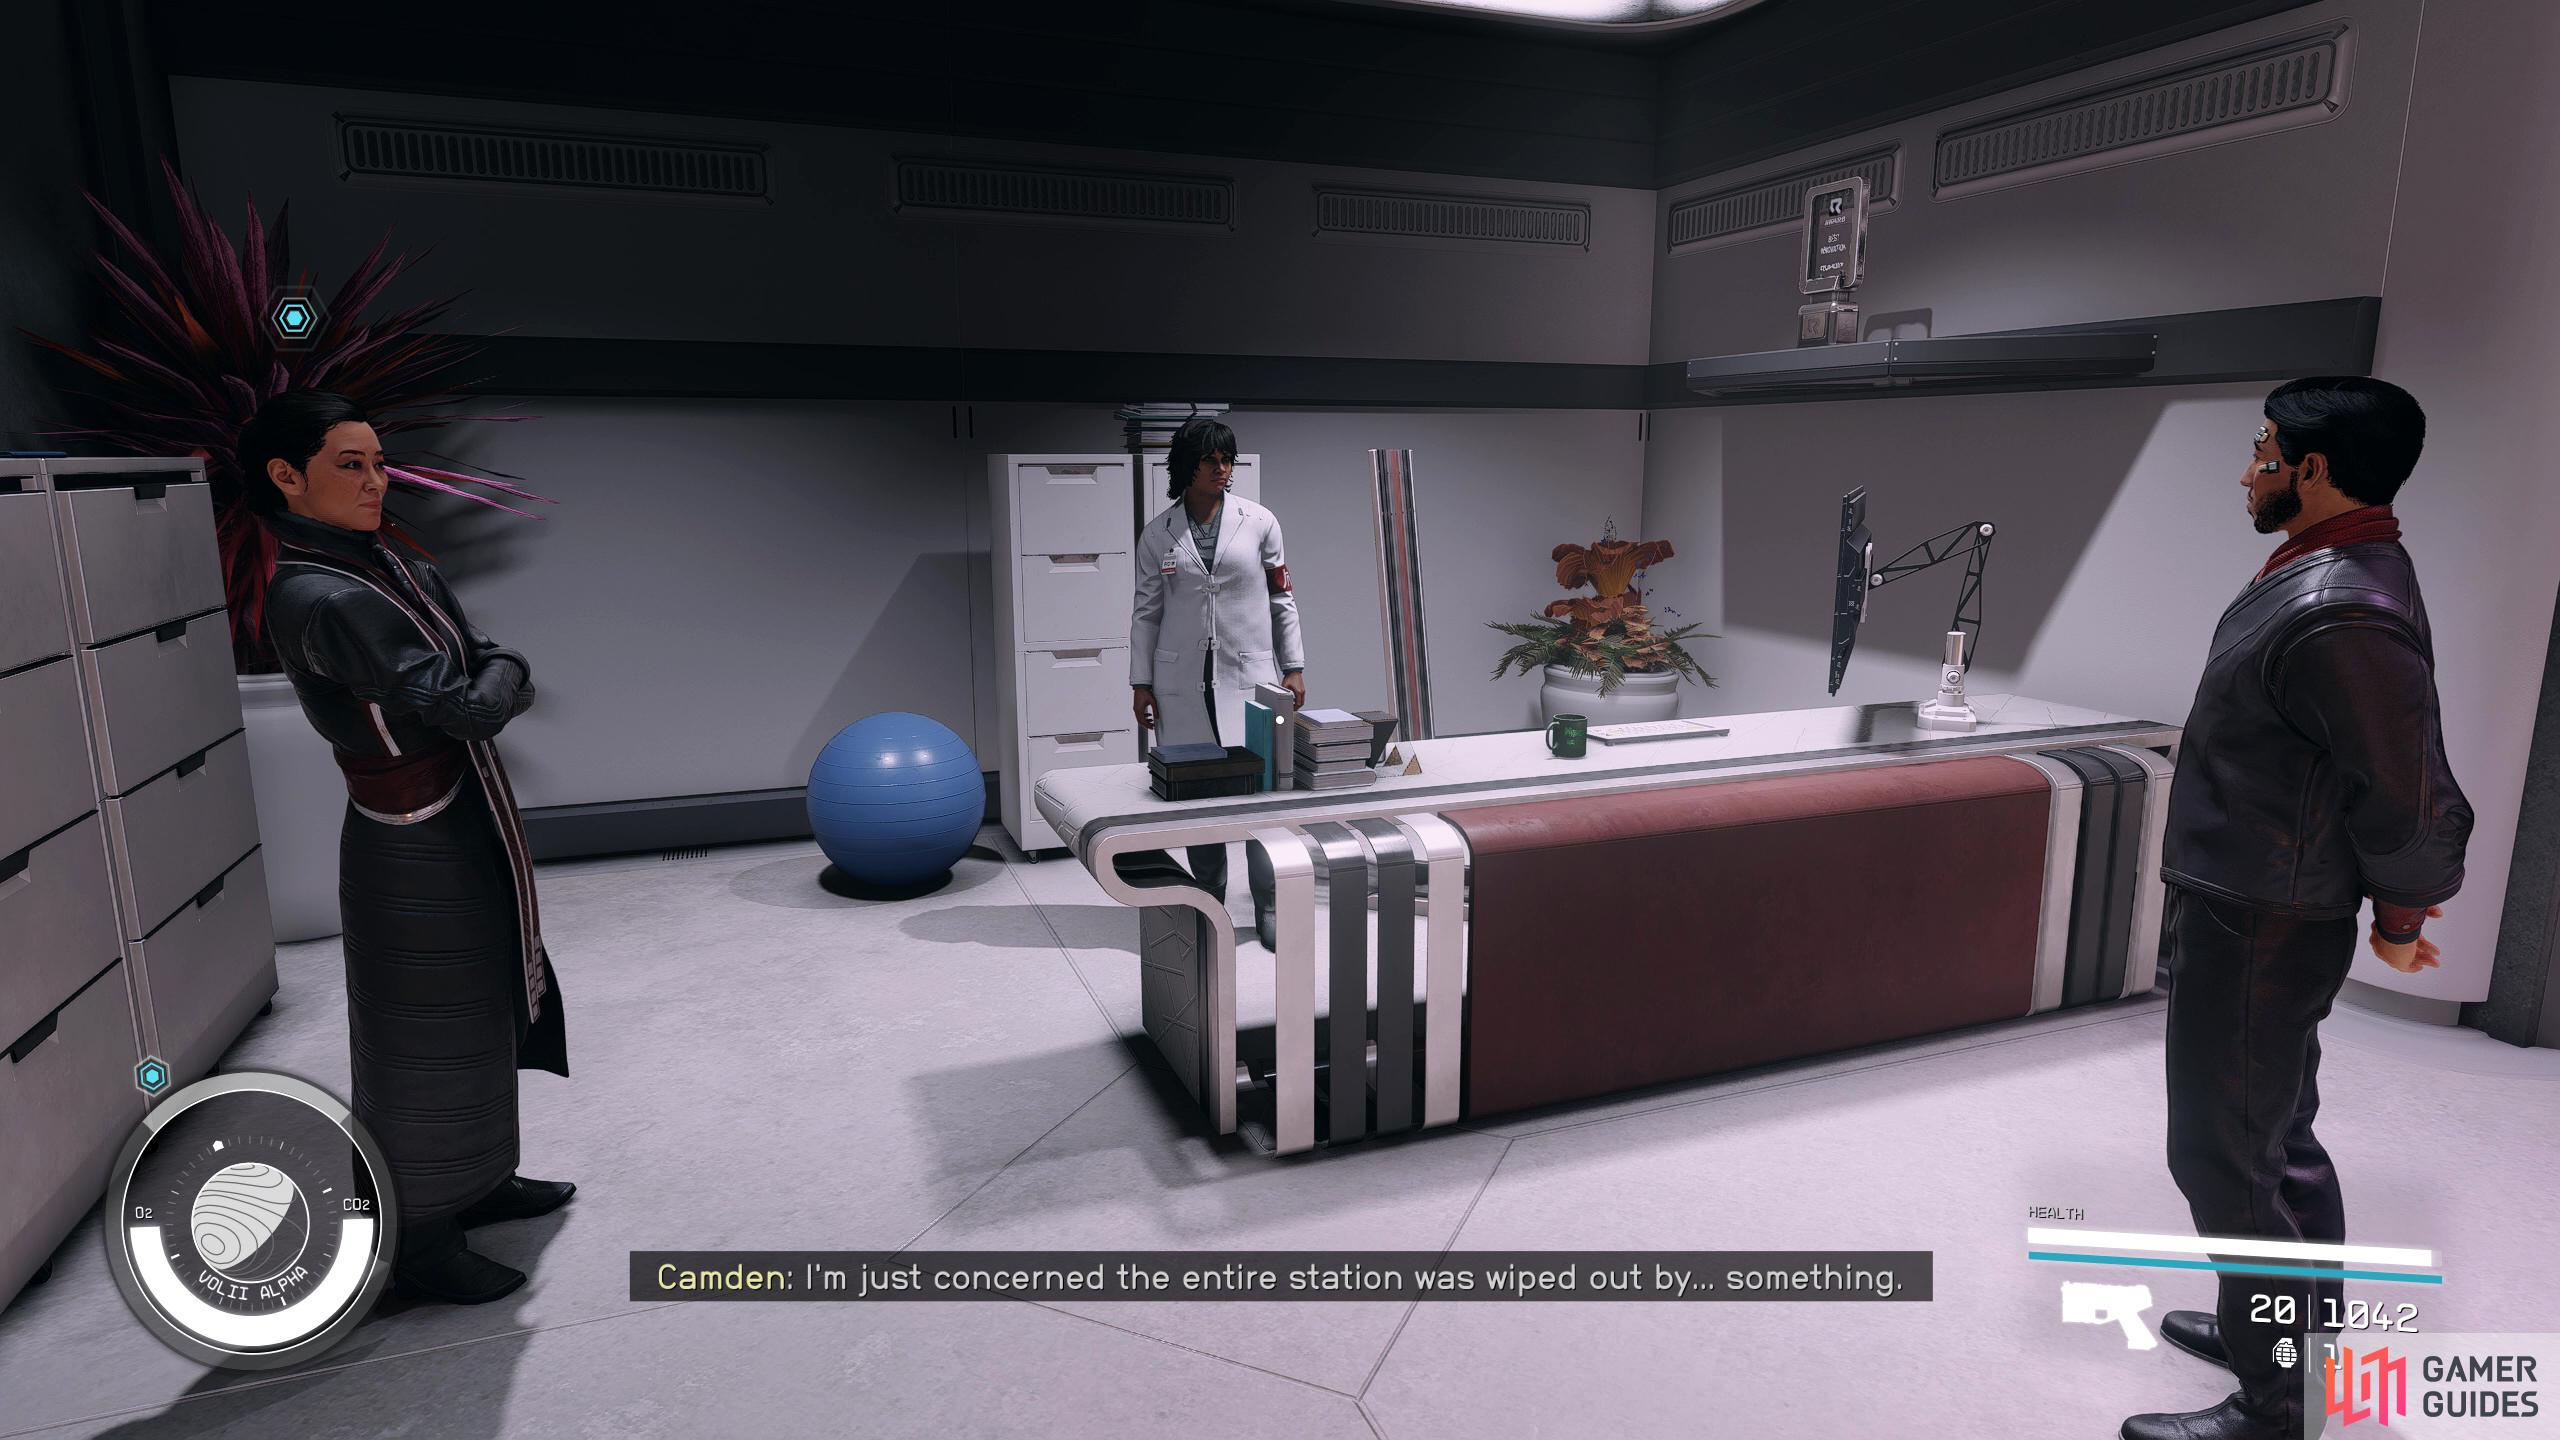 Head into Veena's office where they'll talk about a missing shipment.